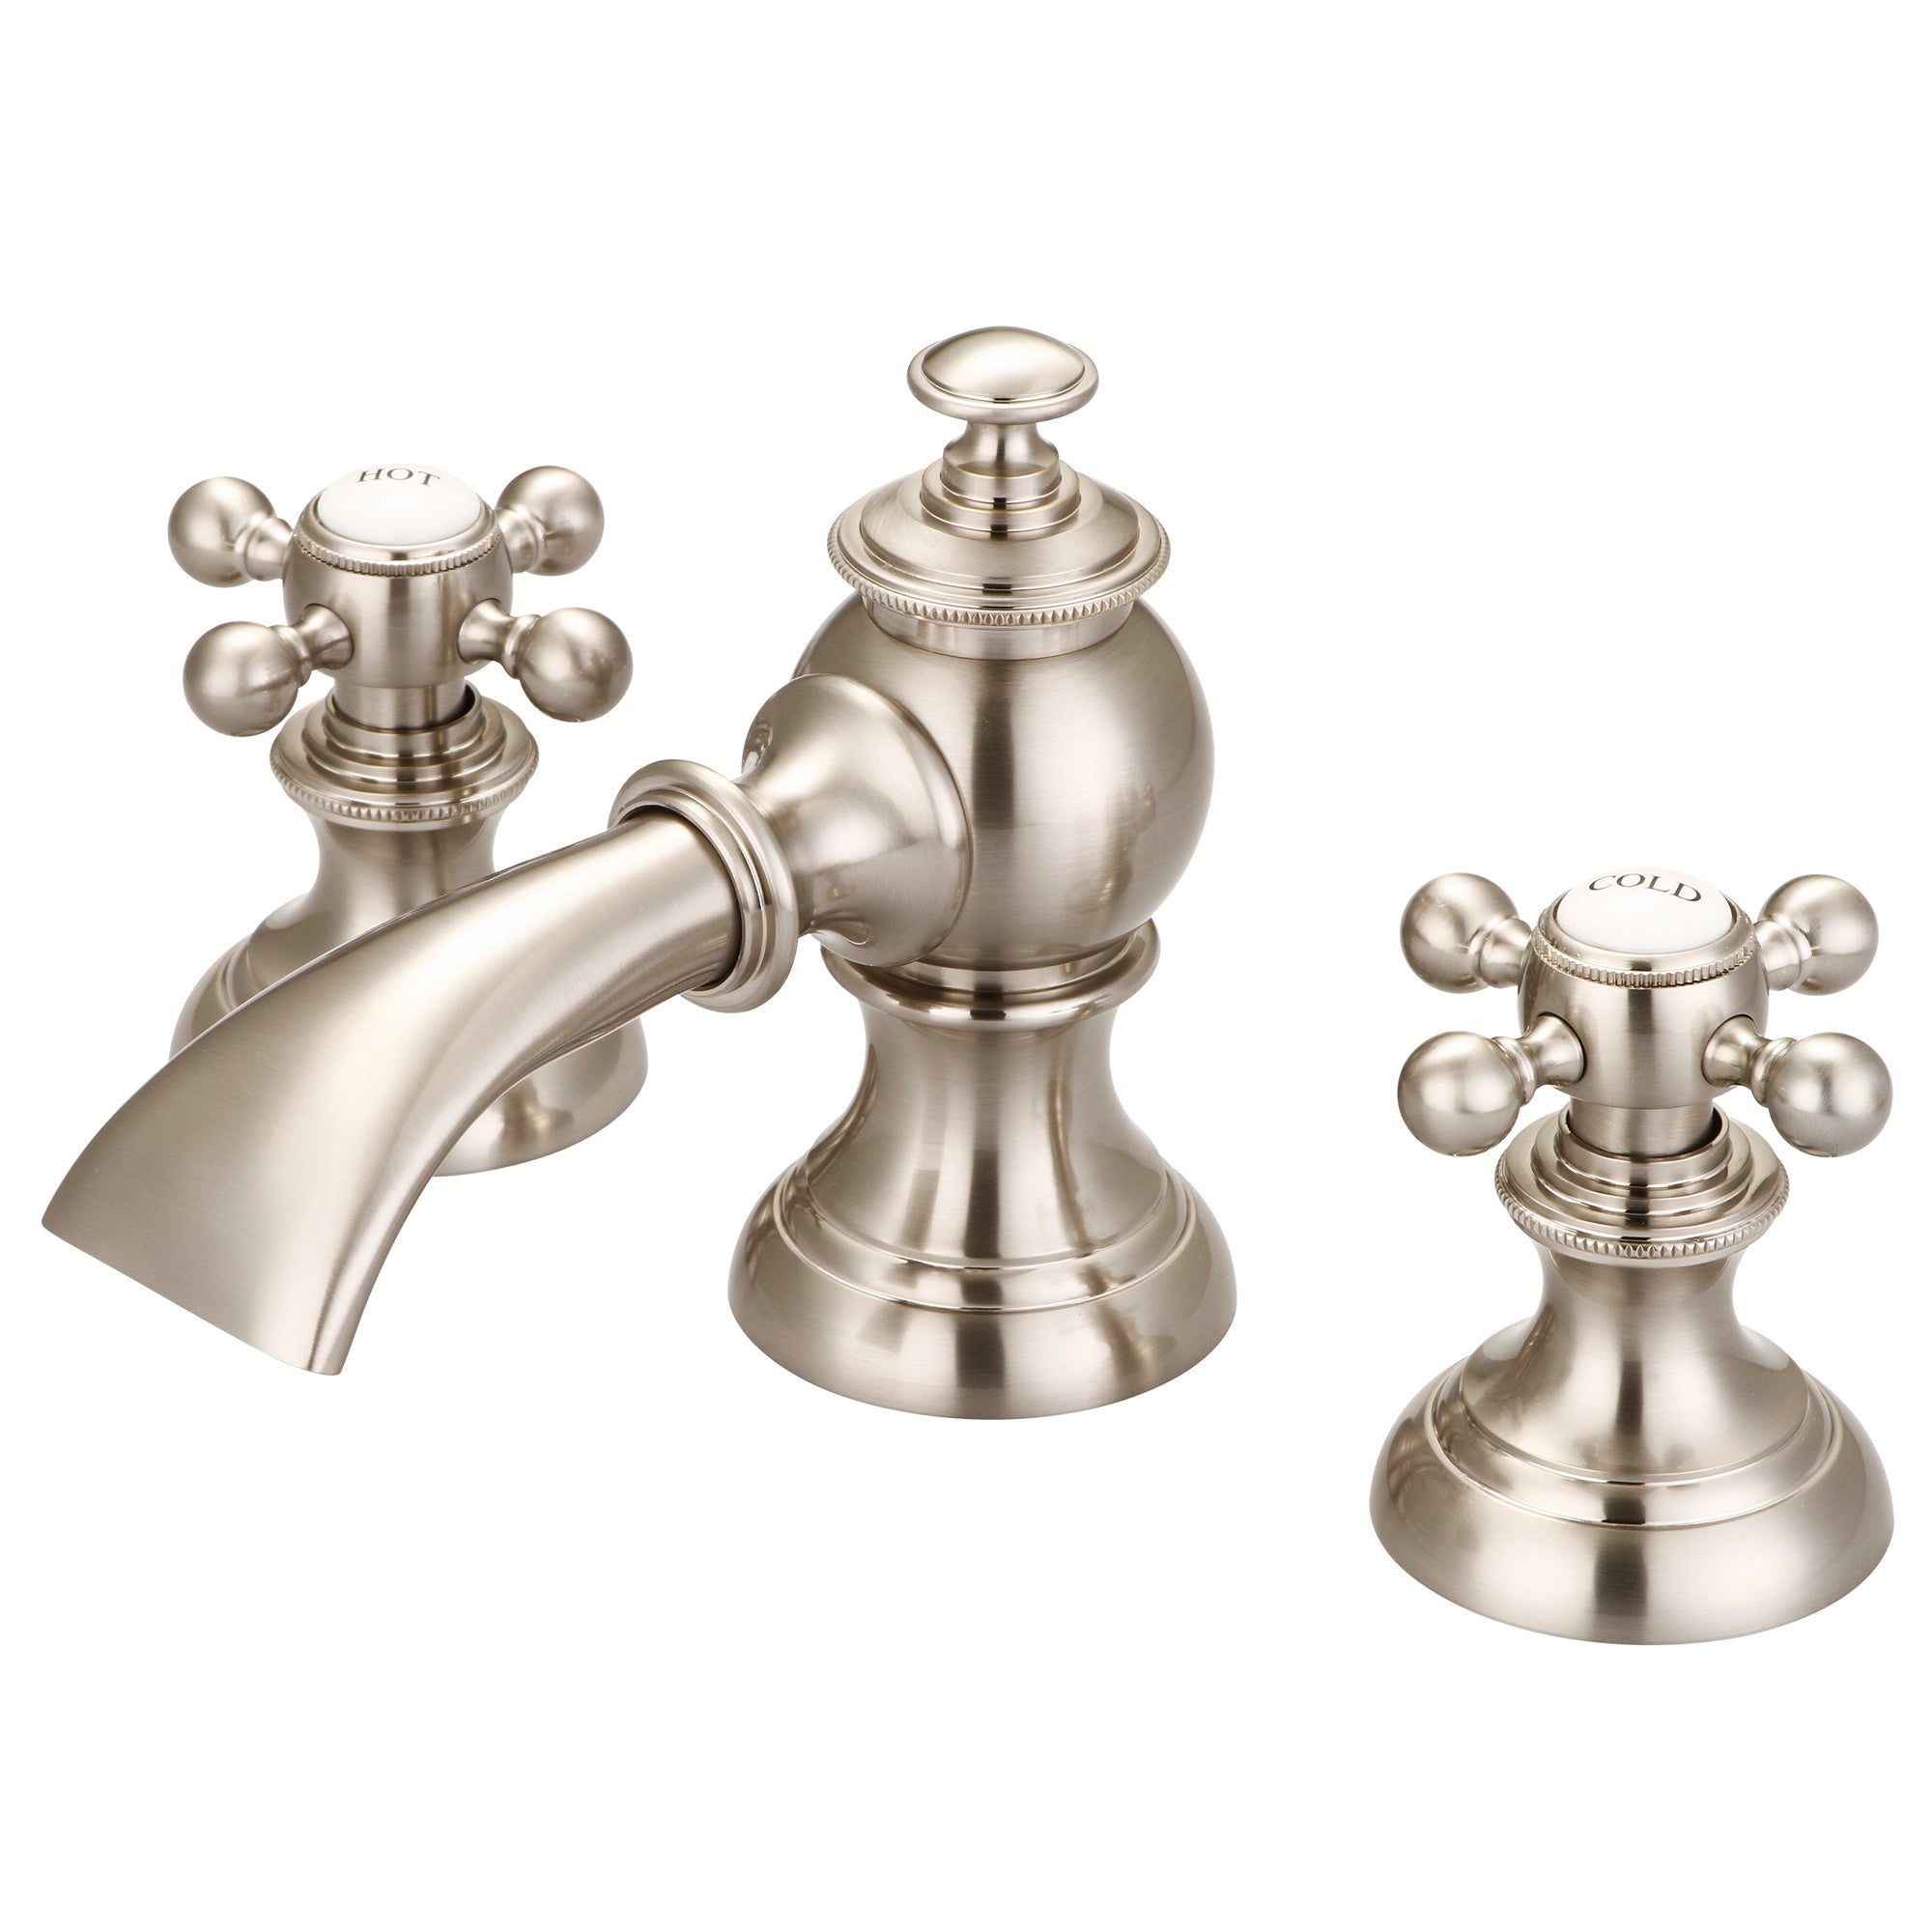 Water Creation | Modern Classic Widespread Lavatory F2-0013 Faucets With Pop-Up Drain in Brushed Nickel Finish With Metal Lever Handles | F2-0013-02-BX